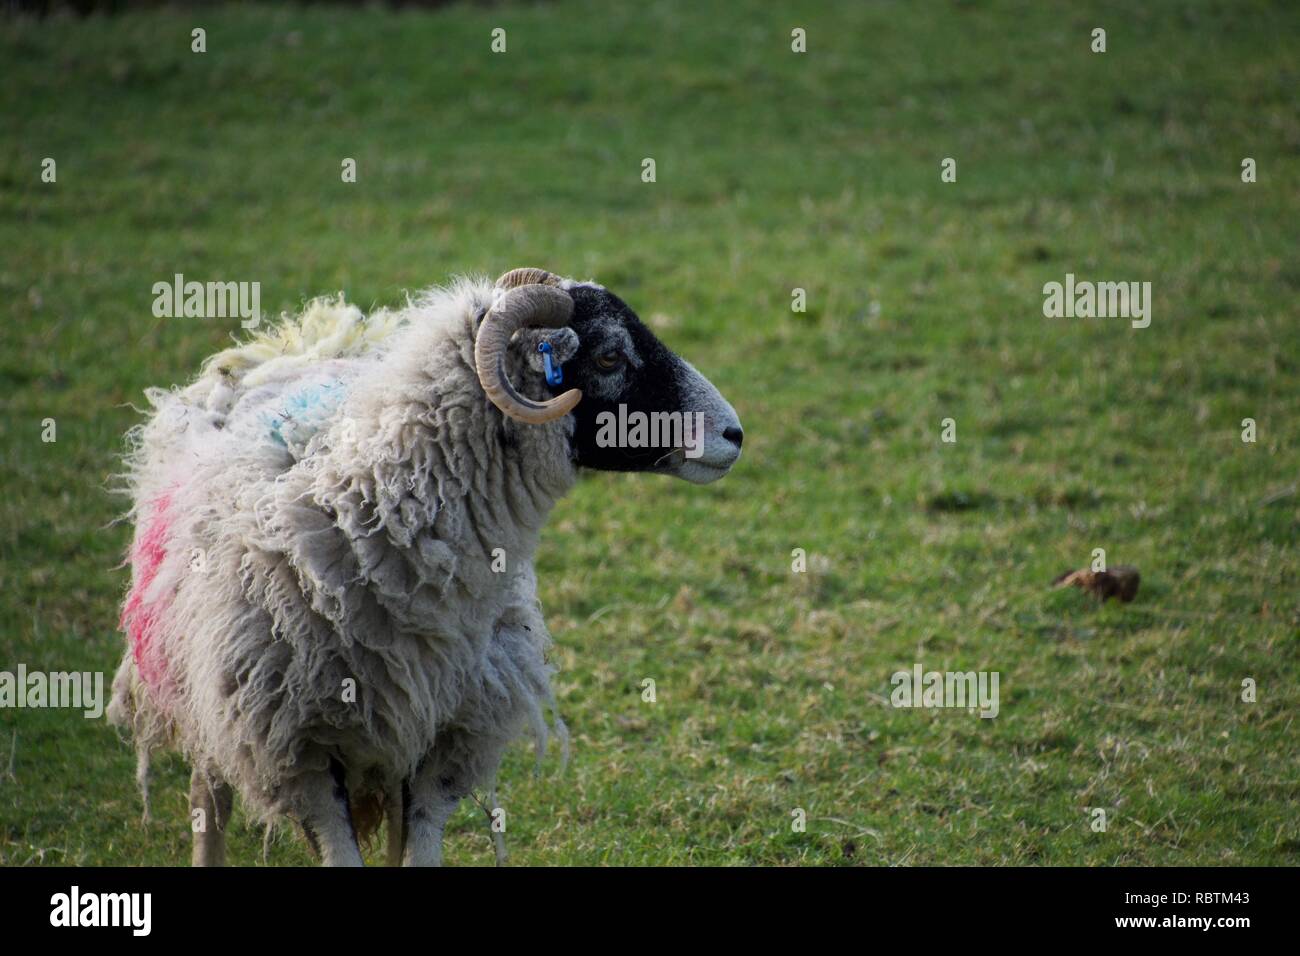 A white sheep with a black face poses in a field, striking against the green grass. She has horns and red and blue marks on her fleece. Stock Photo